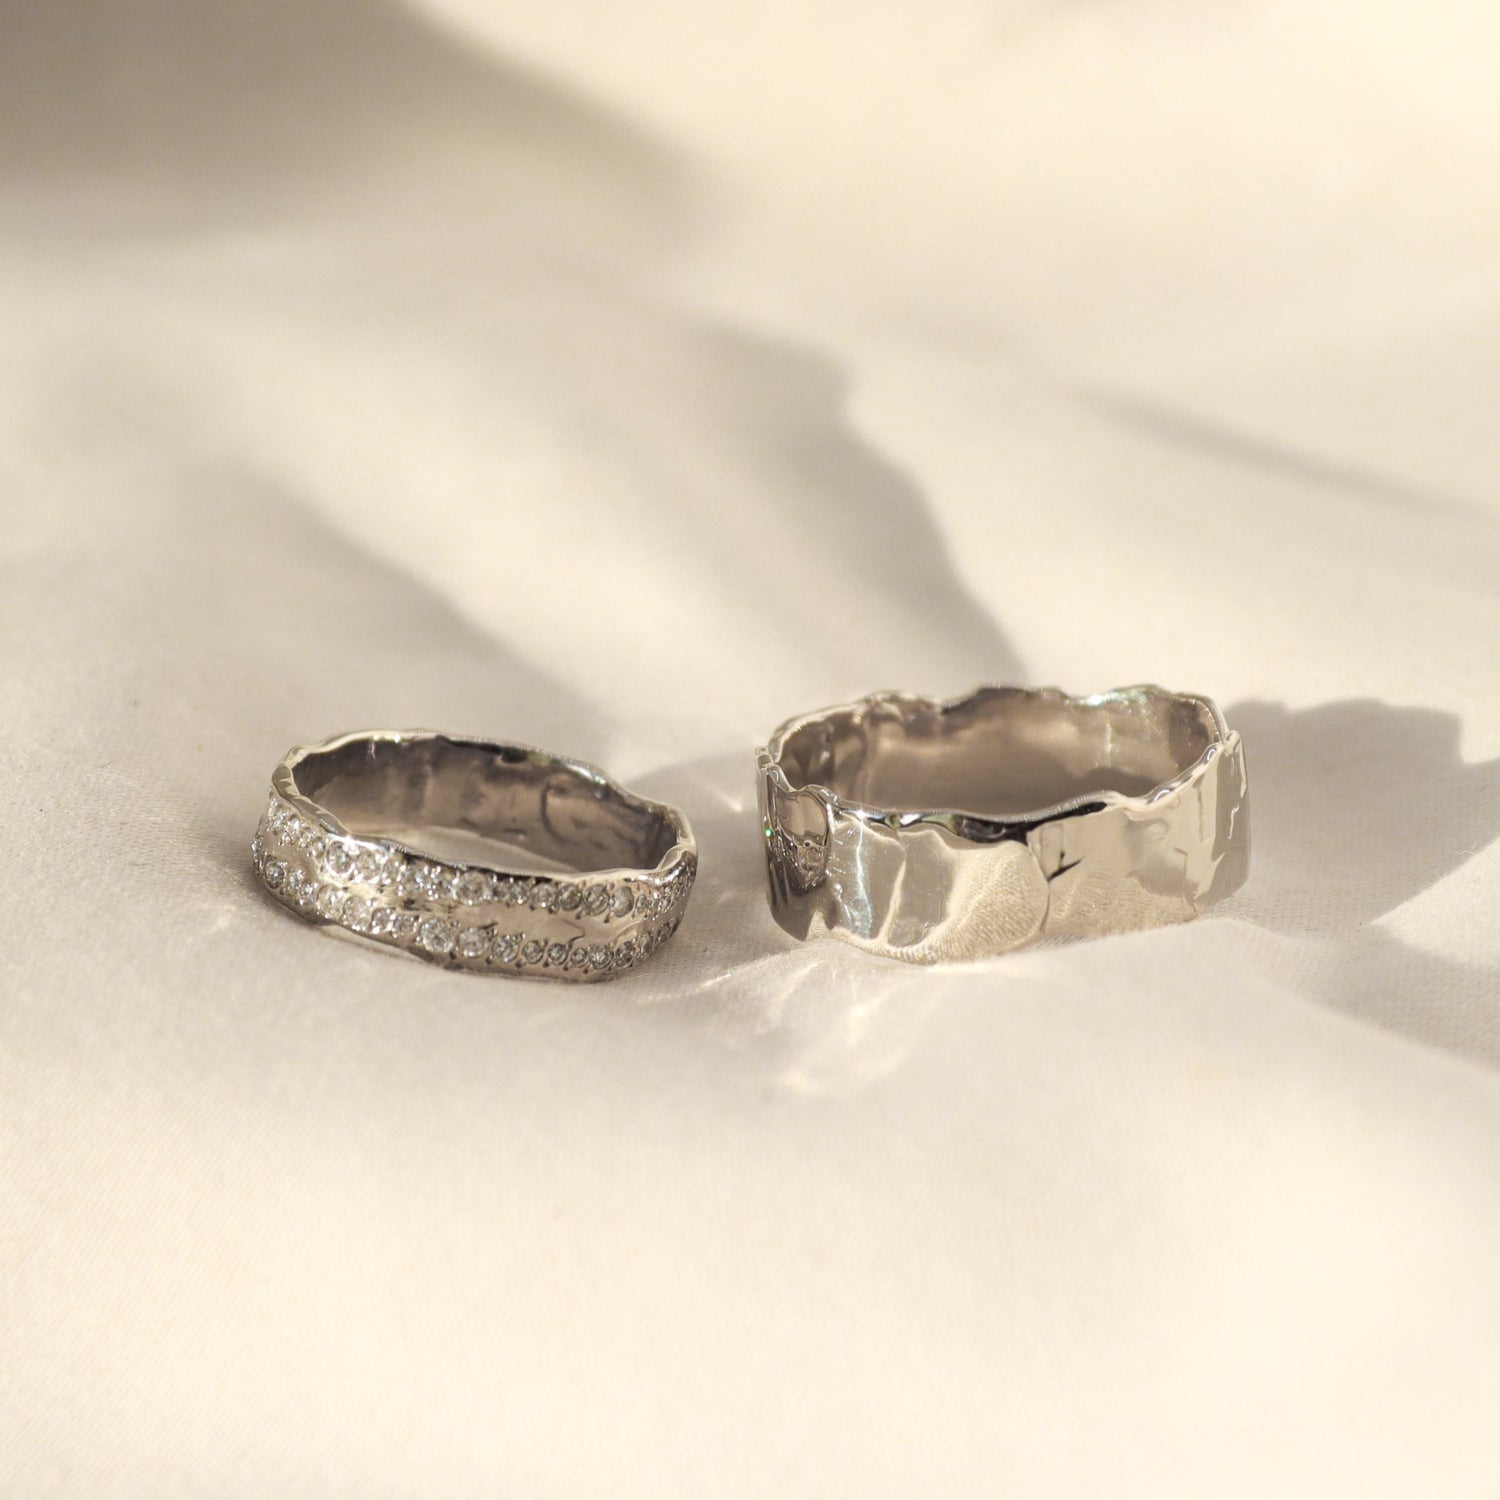 white gold matching wedding bands, one is plain and the other has two rows of diamonds